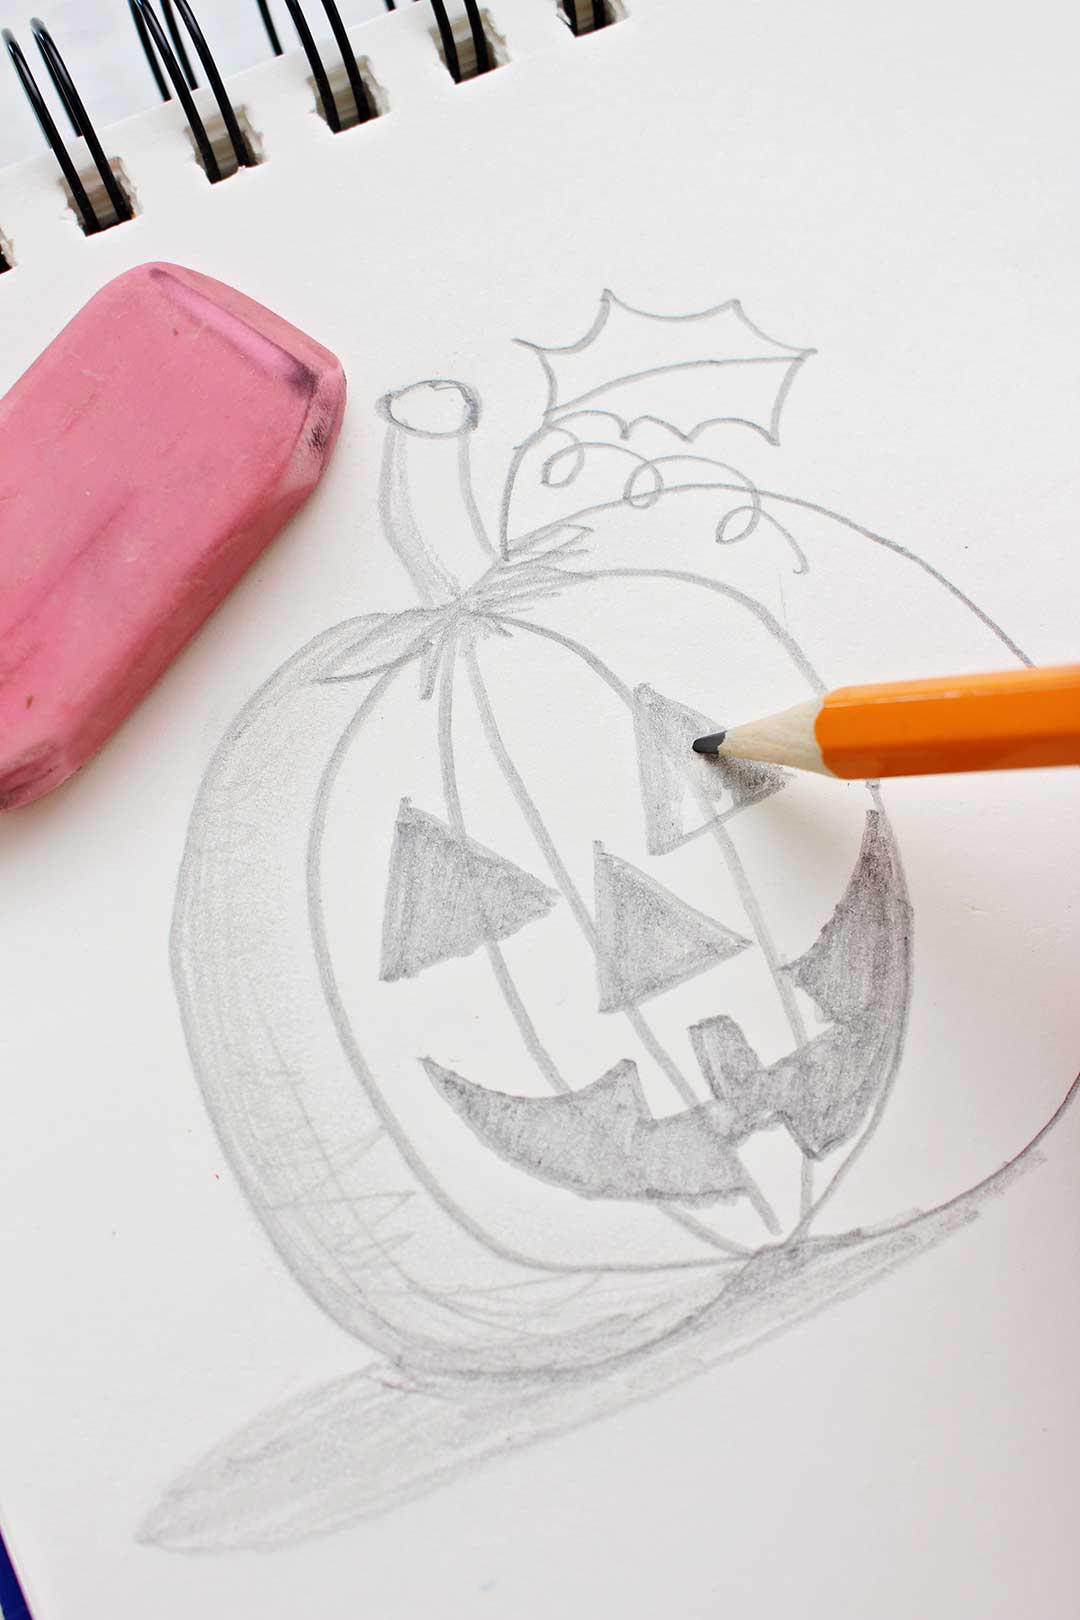 Pencil coloring in the eye of the jack-o-lantern pumpkin sketch.